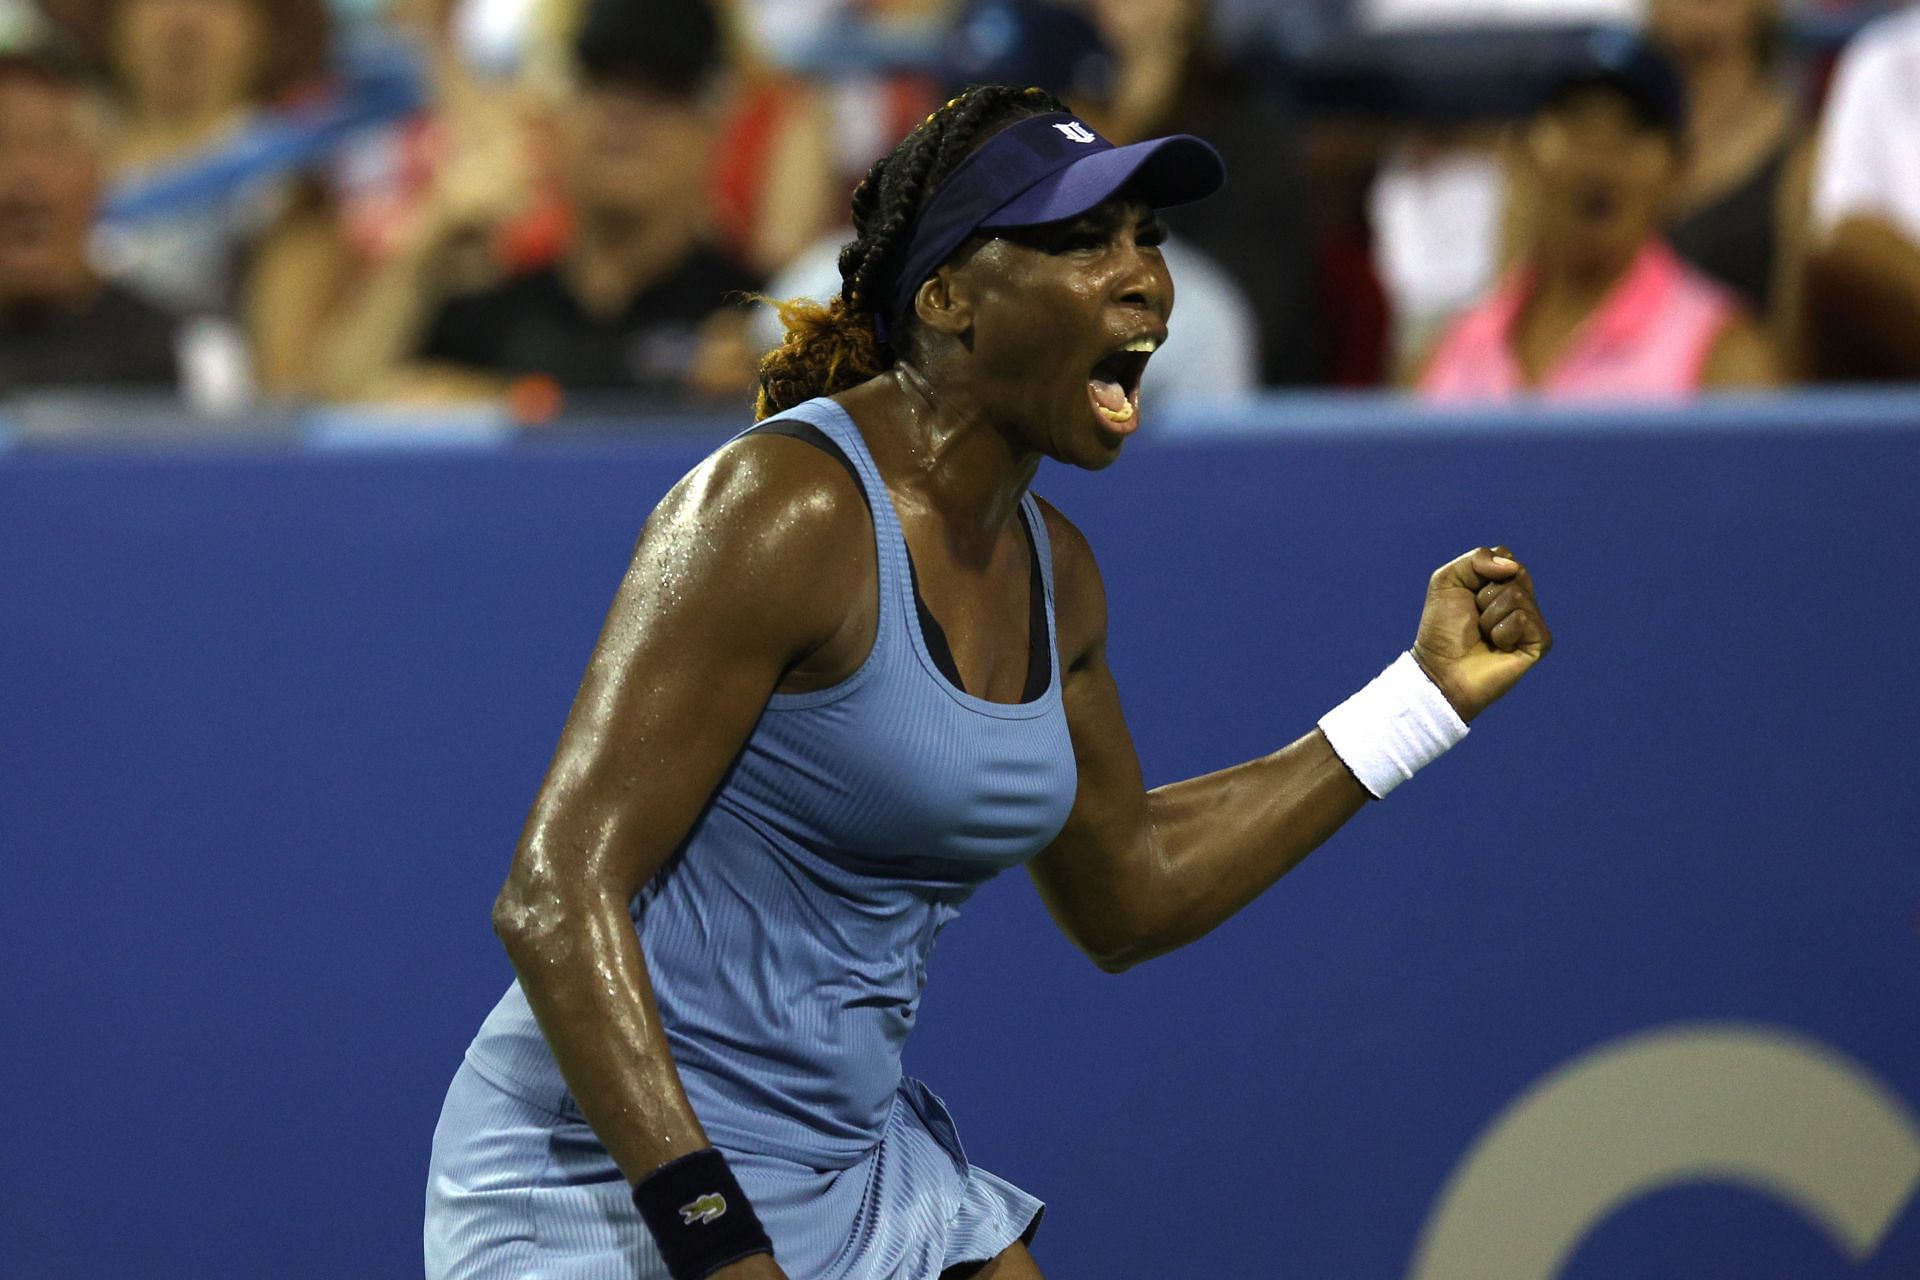 Venus Williams is a wildcard entrant at the Canadian Open. Enter caption